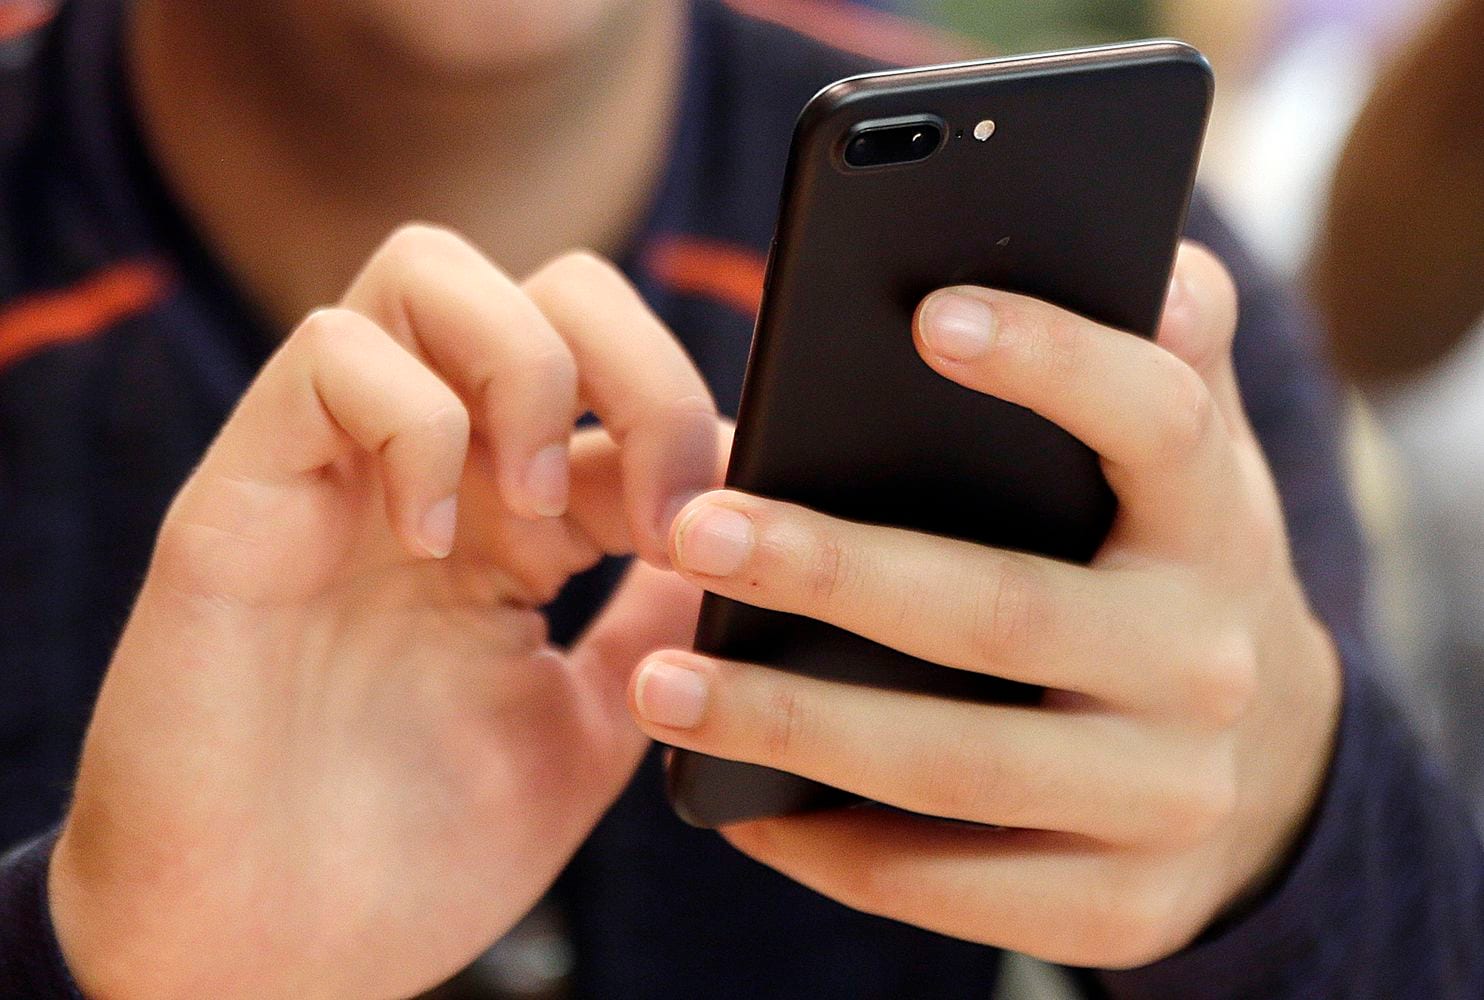 Smartphone addict couldn   t move fingers after using device for a week